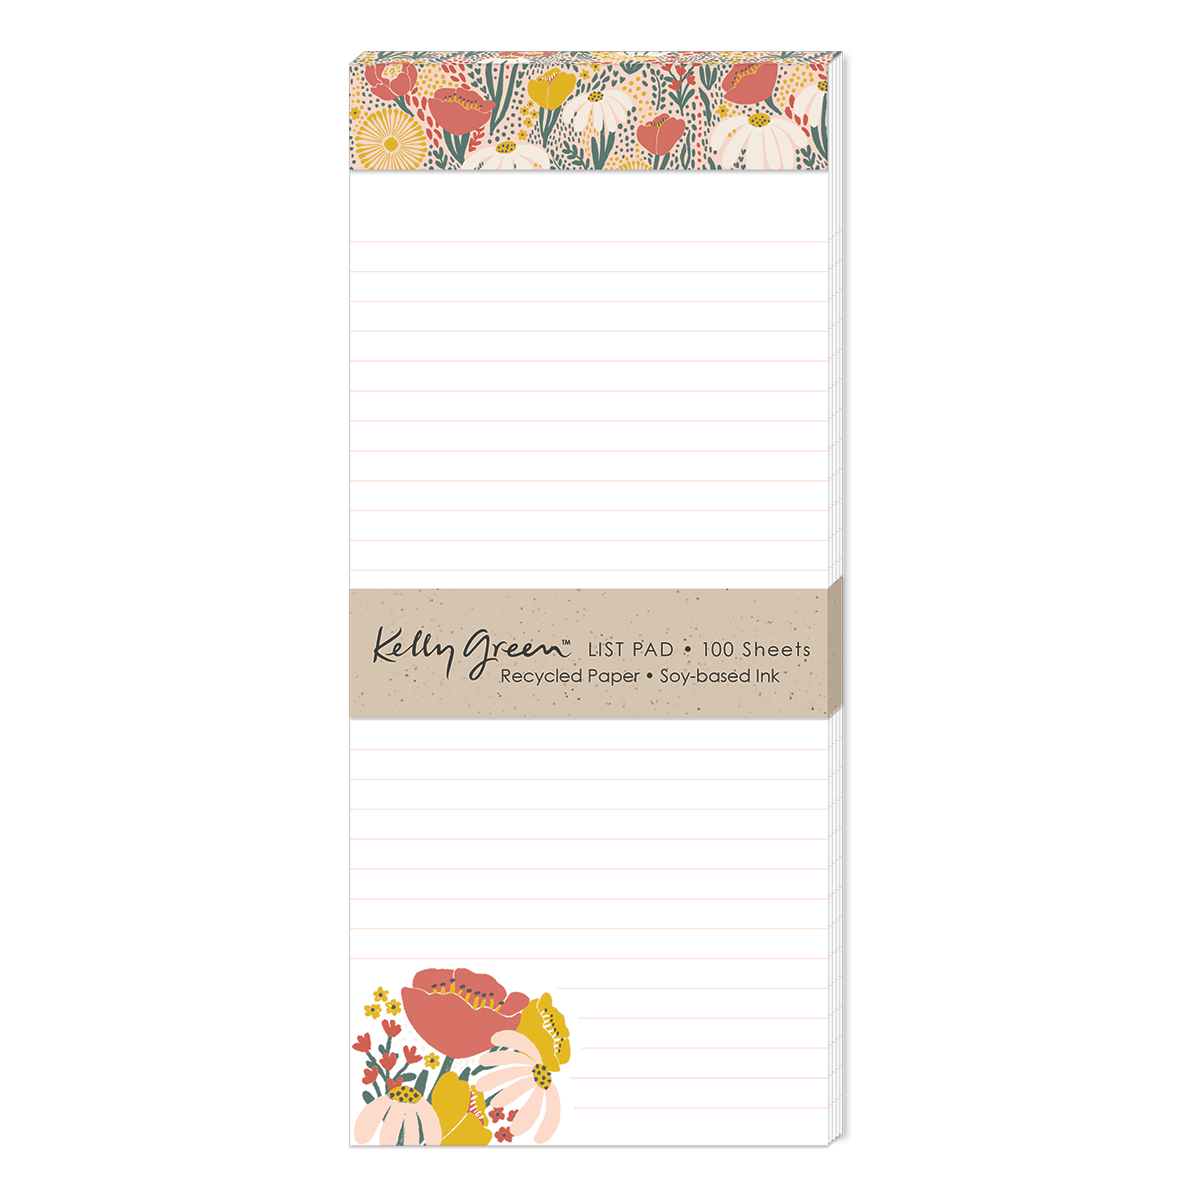 3"x4" Punch Studio Monogrammed Notepad w/Gold Foil Pattern-Magnet Closure     W 